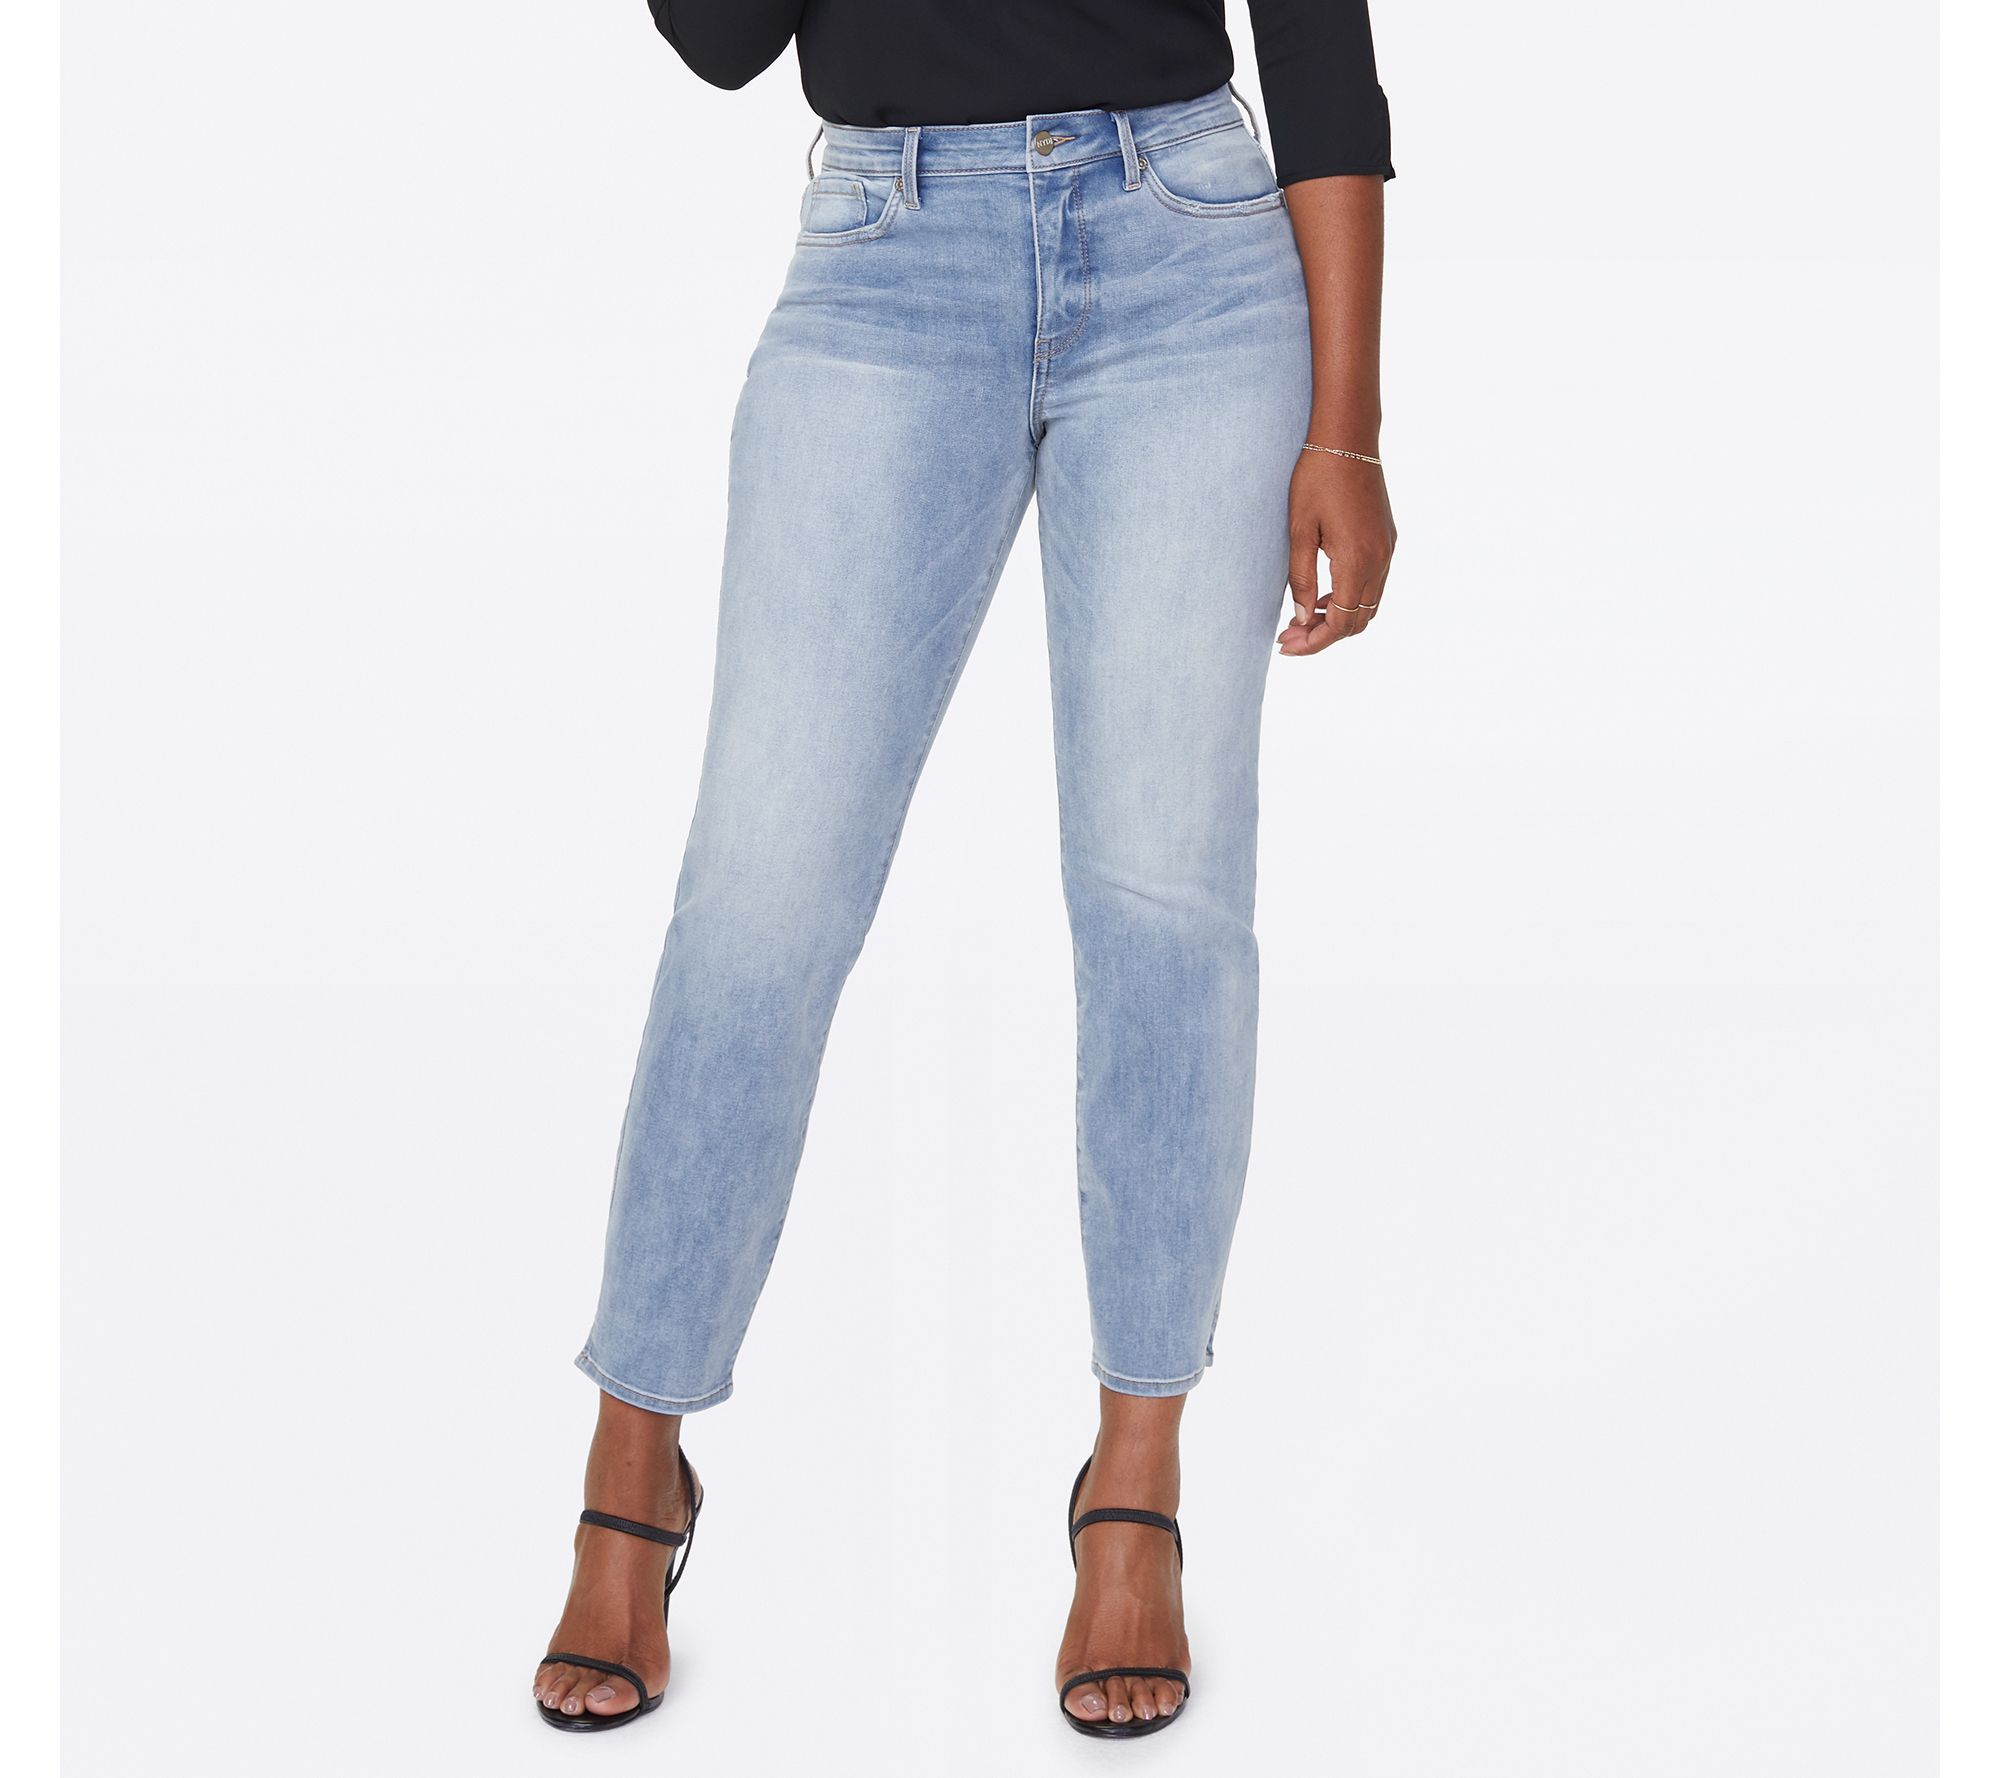 Curves 360 by NYDJ Slim Straight Ankle Jeans w/Side Slits - QVC.com